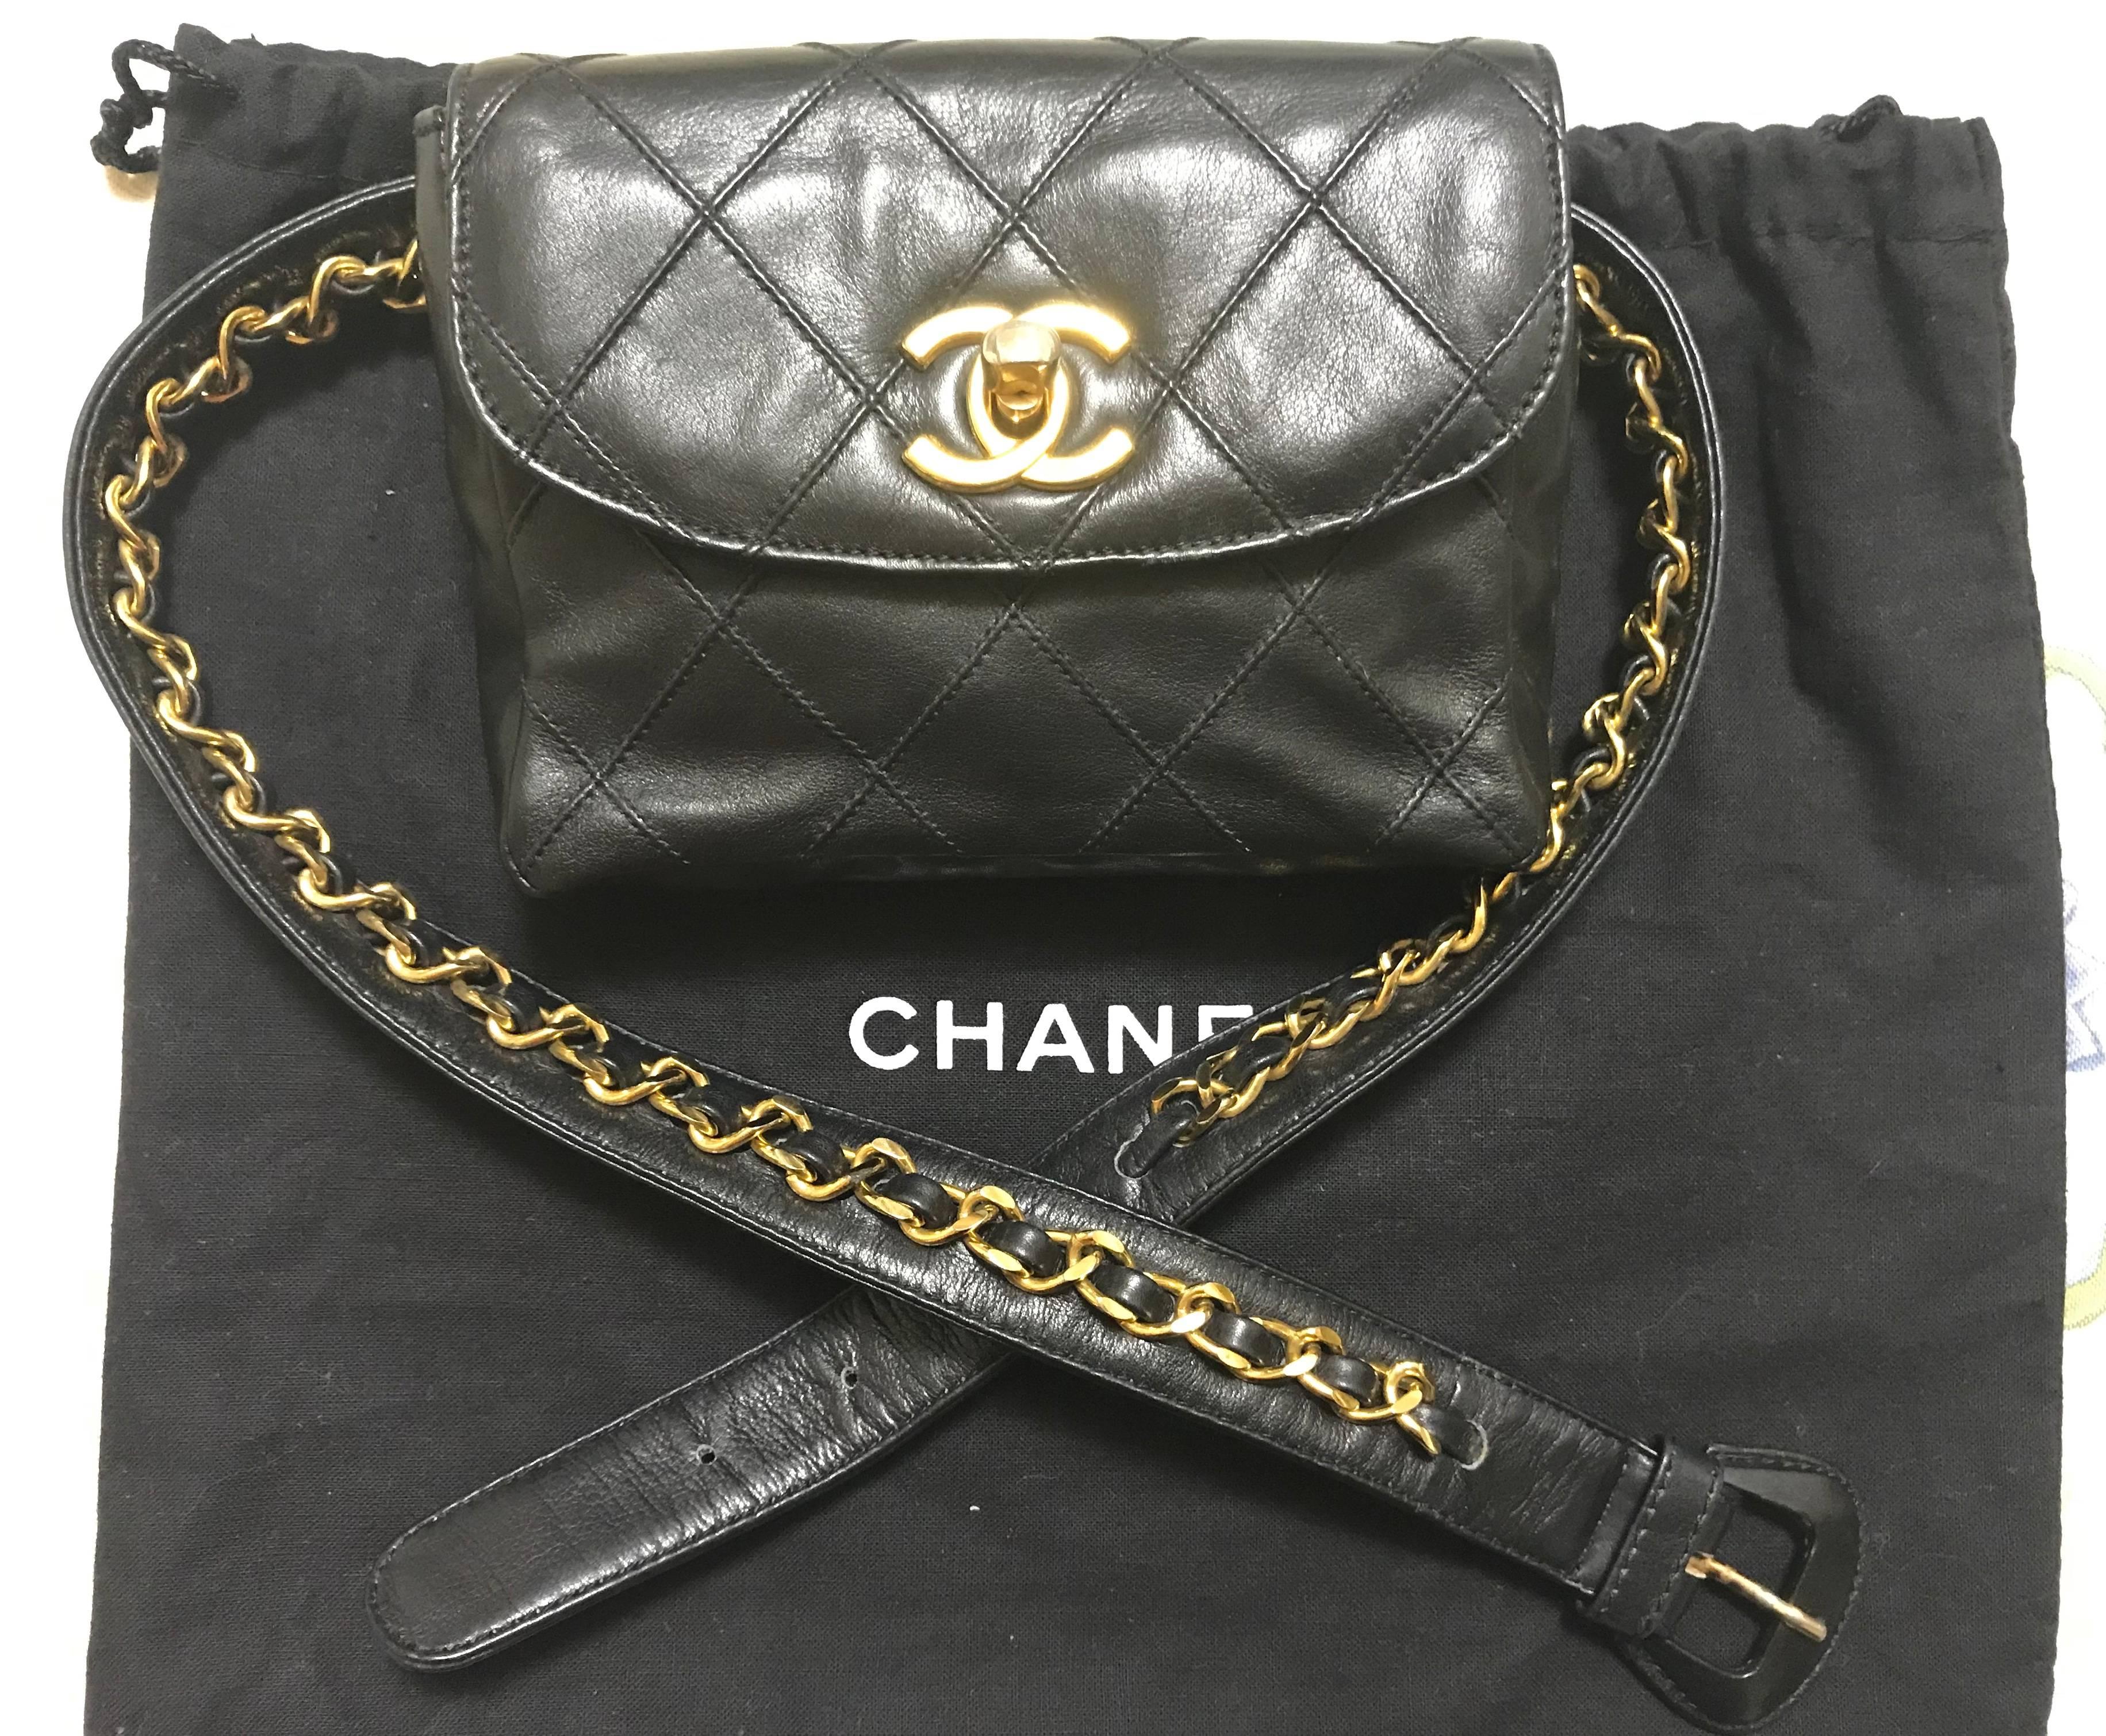 Excellent vintage condition!
1990s. Vintage CHANEL black calfskin leather waist bag, fanny pack with golden chain belt & CC closure. Belt size good for 30”-31.9”(76cm~80cm). 

Classic and most popular bag from CHANEL back in the 90's. Featuring the